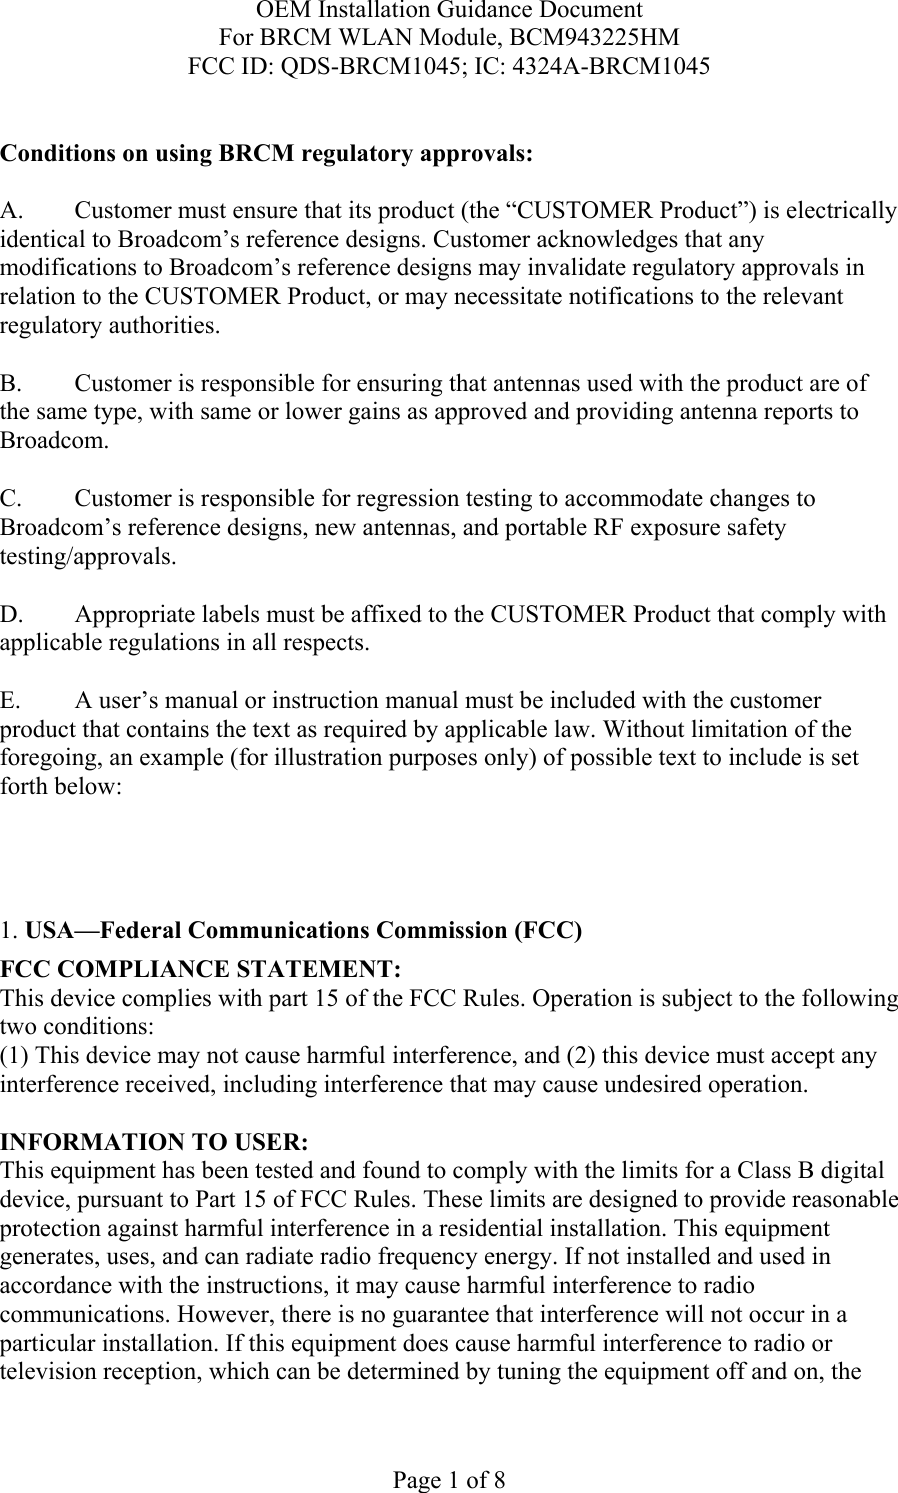 OEM Installation Guidance Document For BRCM WLAN Module, BCM943225HM FCC ID: QDS-BRCM1045; IC: 4324A-BRCM1045  Page 1 of 8  Conditions on using BRCM regulatory approvals:   A.  Customer must ensure that its product (the “CUSTOMER Product”) is electrically identical to Broadcom’s reference designs. Customer acknowledges that any modifications to Broadcom’s reference designs may invalidate regulatory approvals in relation to the CUSTOMER Product, or may necessitate notifications to the relevant regulatory authorities.  B.   Customer is responsible for ensuring that antennas used with the product are of the same type, with same or lower gains as approved and providing antenna reports to Broadcom.  C.   Customer is responsible for regression testing to accommodate changes to Broadcom’s reference designs, new antennas, and portable RF exposure safety testing/approvals.  D.  Appropriate labels must be affixed to the CUSTOMER Product that comply with applicable regulations in all respects.    E.  A user’s manual or instruction manual must be included with the customer product that contains the text as required by applicable law. Without limitation of the foregoing, an example (for illustration purposes only) of possible text to include is set forth below:      1. USA—Federal Communications Commission (FCC) FCC COMPLIANCE STATEMENT: This device complies with part 15 of the FCC Rules. Operation is subject to the following two conditions: (1) This device may not cause harmful interference, and (2) this device must accept any interference received, including interference that may cause undesired operation.  INFORMATION TO USER: This equipment has been tested and found to comply with the limits for a Class B digital device, pursuant to Part 15 of FCC Rules. These limits are designed to provide reasonable protection against harmful interference in a residential installation. This equipment generates, uses, and can radiate radio frequency energy. If not installed and used in accordance with the instructions, it may cause harmful interference to radio communications. However, there is no guarantee that interference will not occur in a particular installation. If this equipment does cause harmful interference to radio or television reception, which can be determined by tuning the equipment off and on, the 